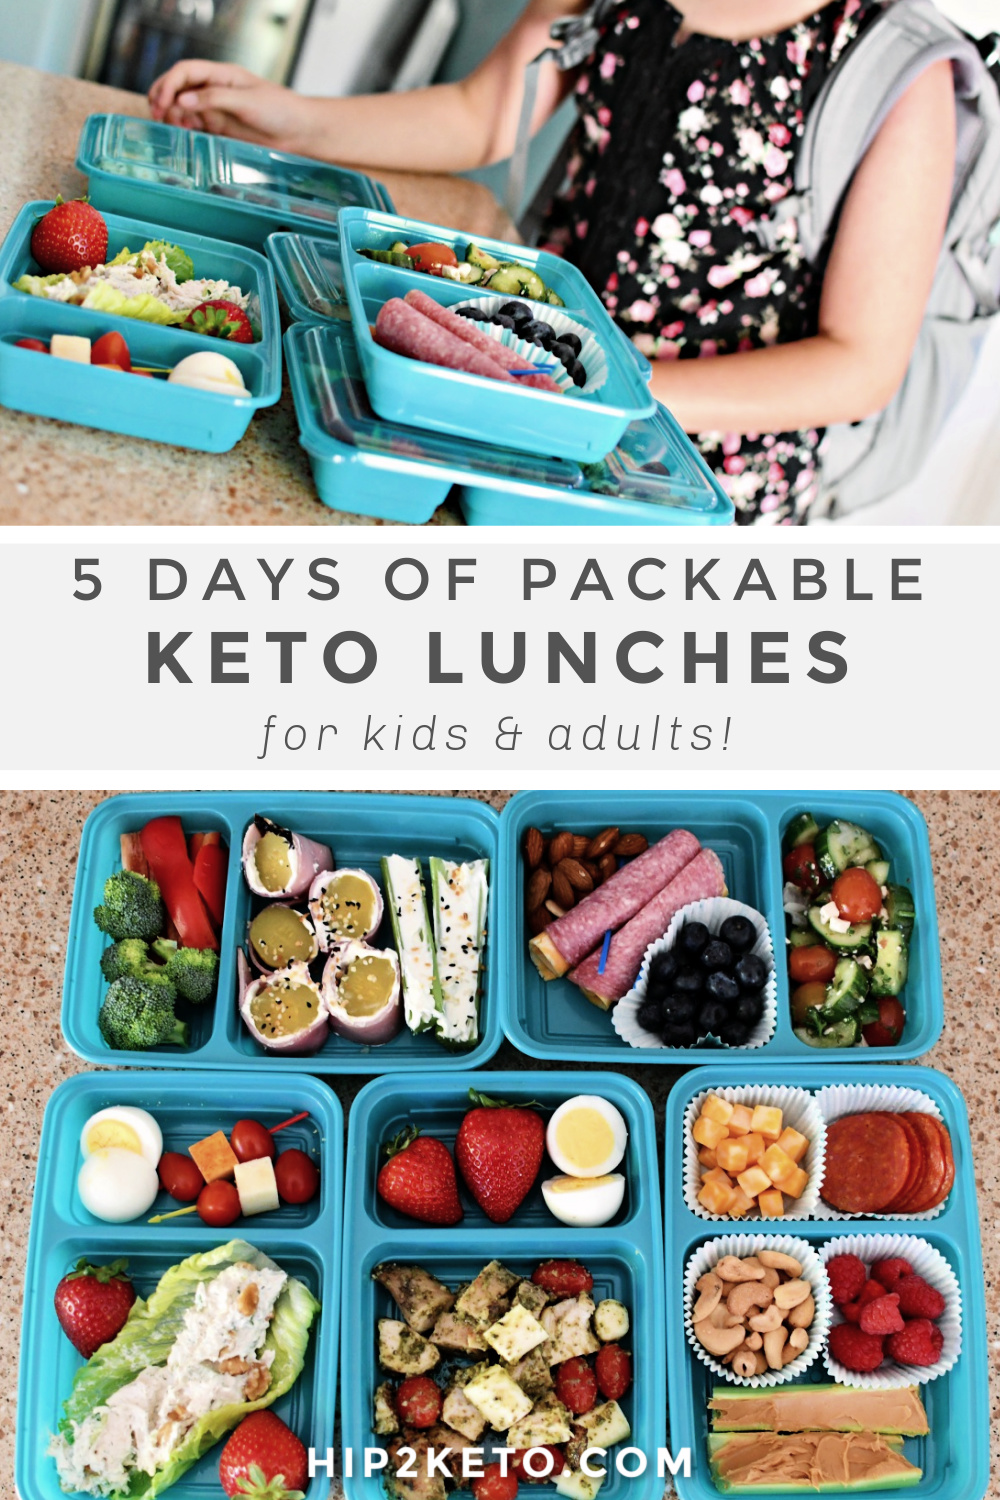 12 Easy Keto Recipes for Kids for the Keto Diet - Cool Web Fun